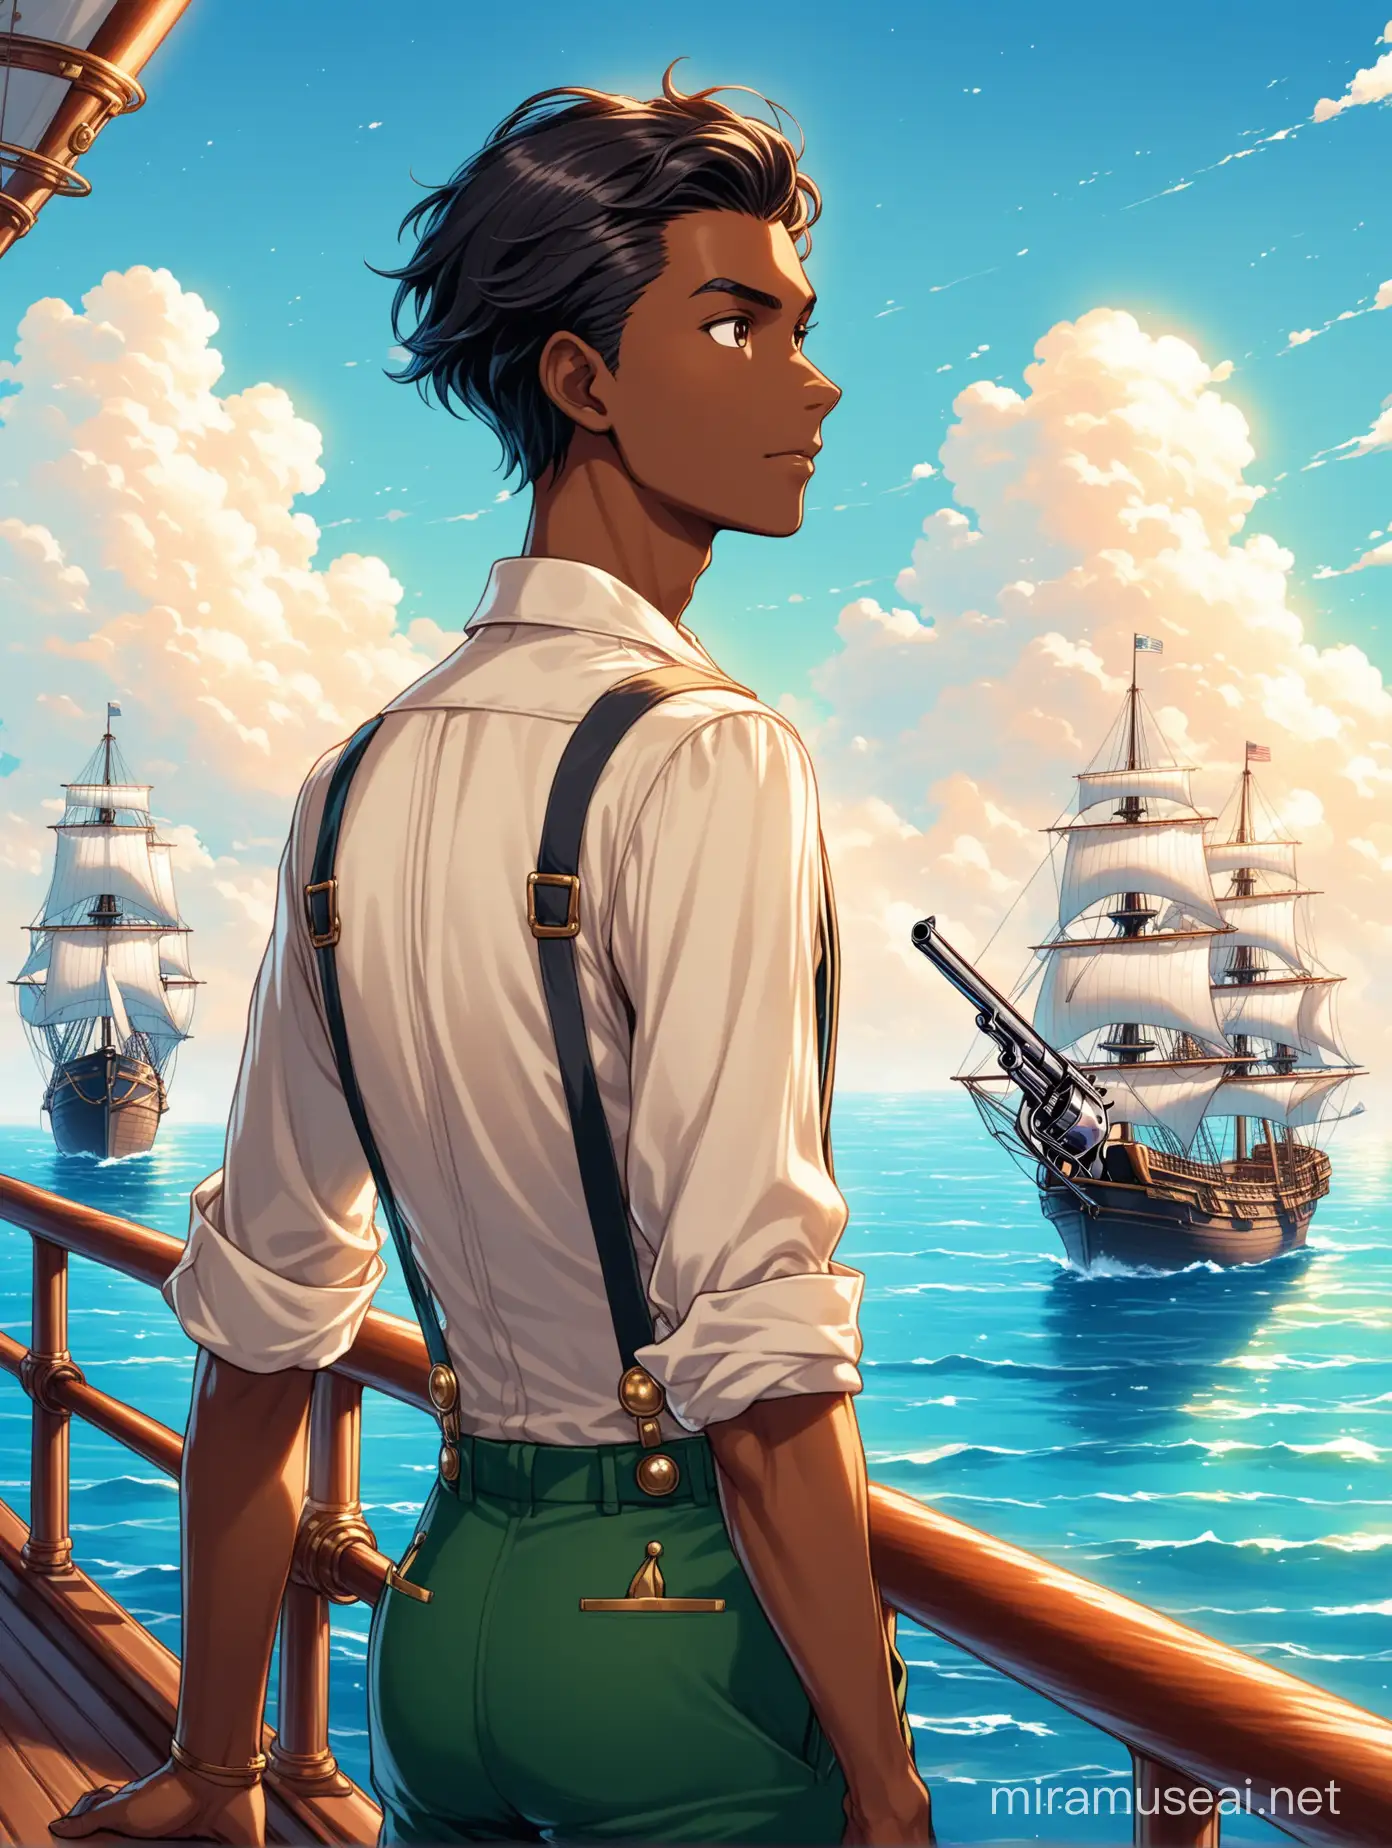 Tall Lanky Man in Bright Outfit with Revolvers on Sea Ship